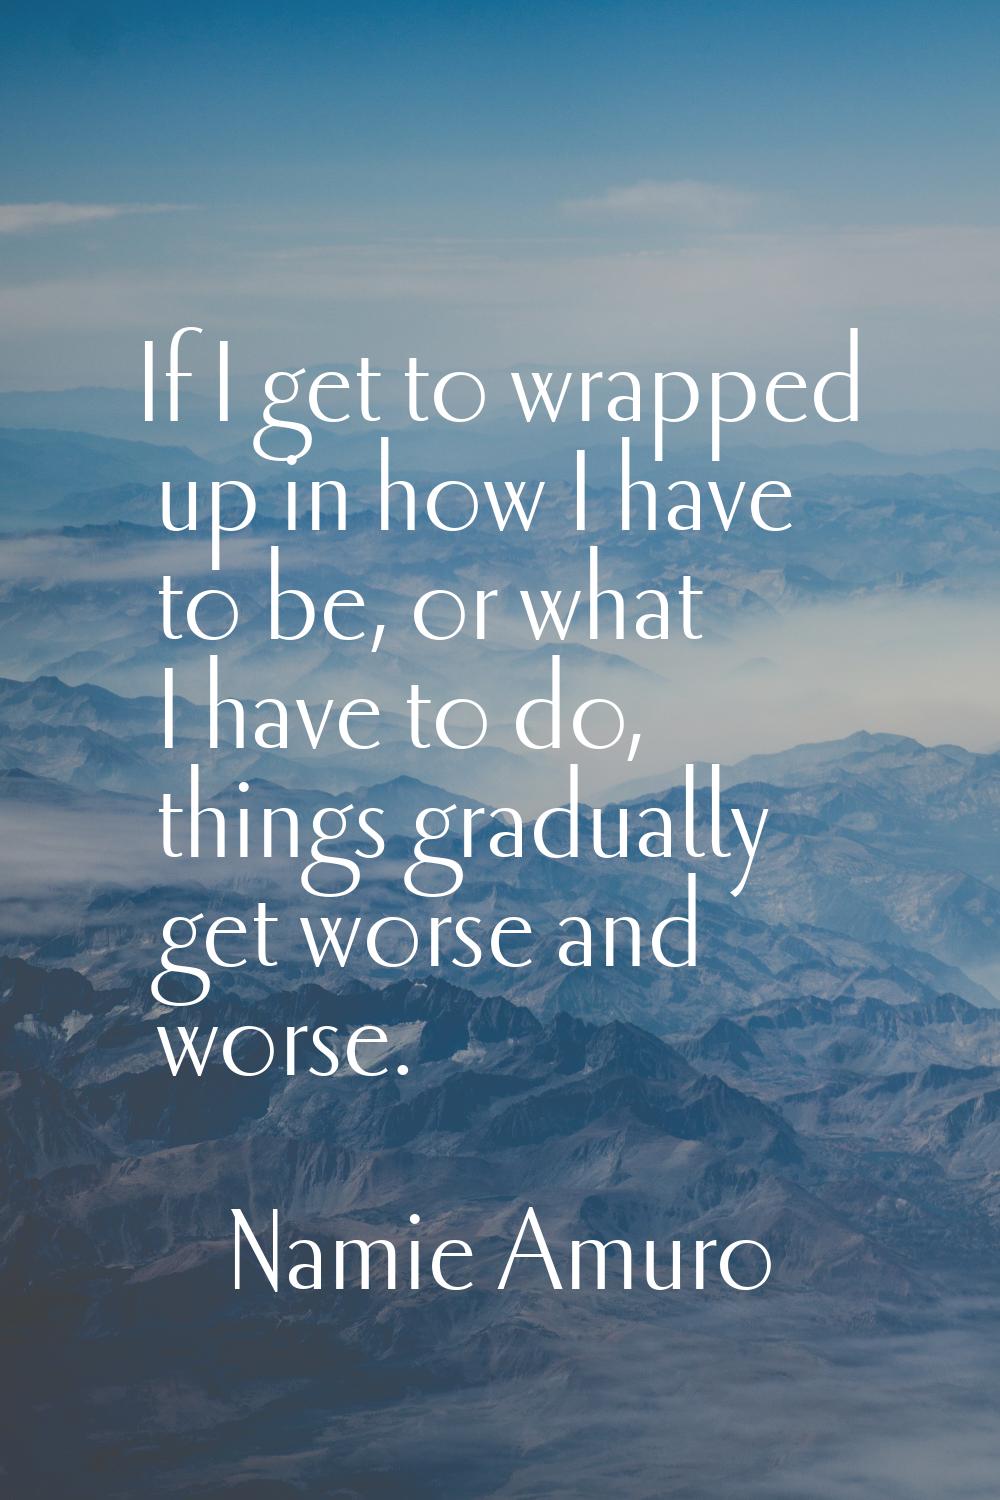 If I get to wrapped up in how I have to be, or what I have to do, things gradually get worse and wo